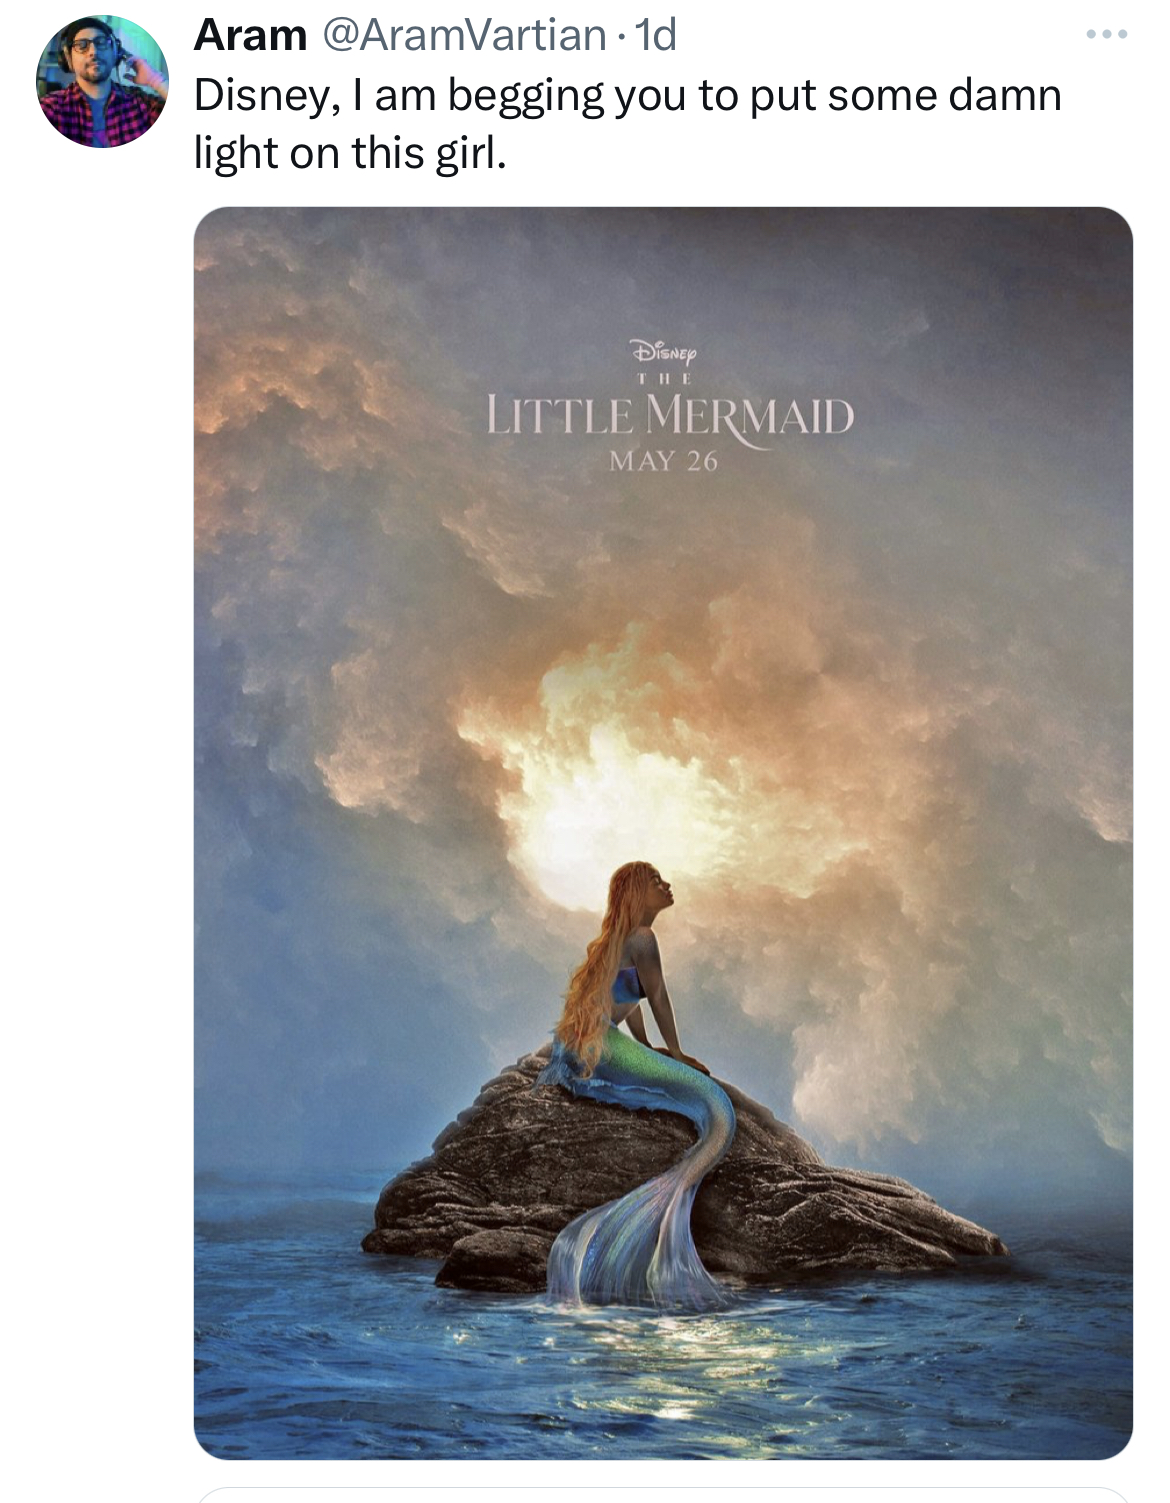 savage tweets roasting celebs - wave - Aram Disney, I am begging you to put some damn light on this girl. Blaup The Little Mermaid May 26